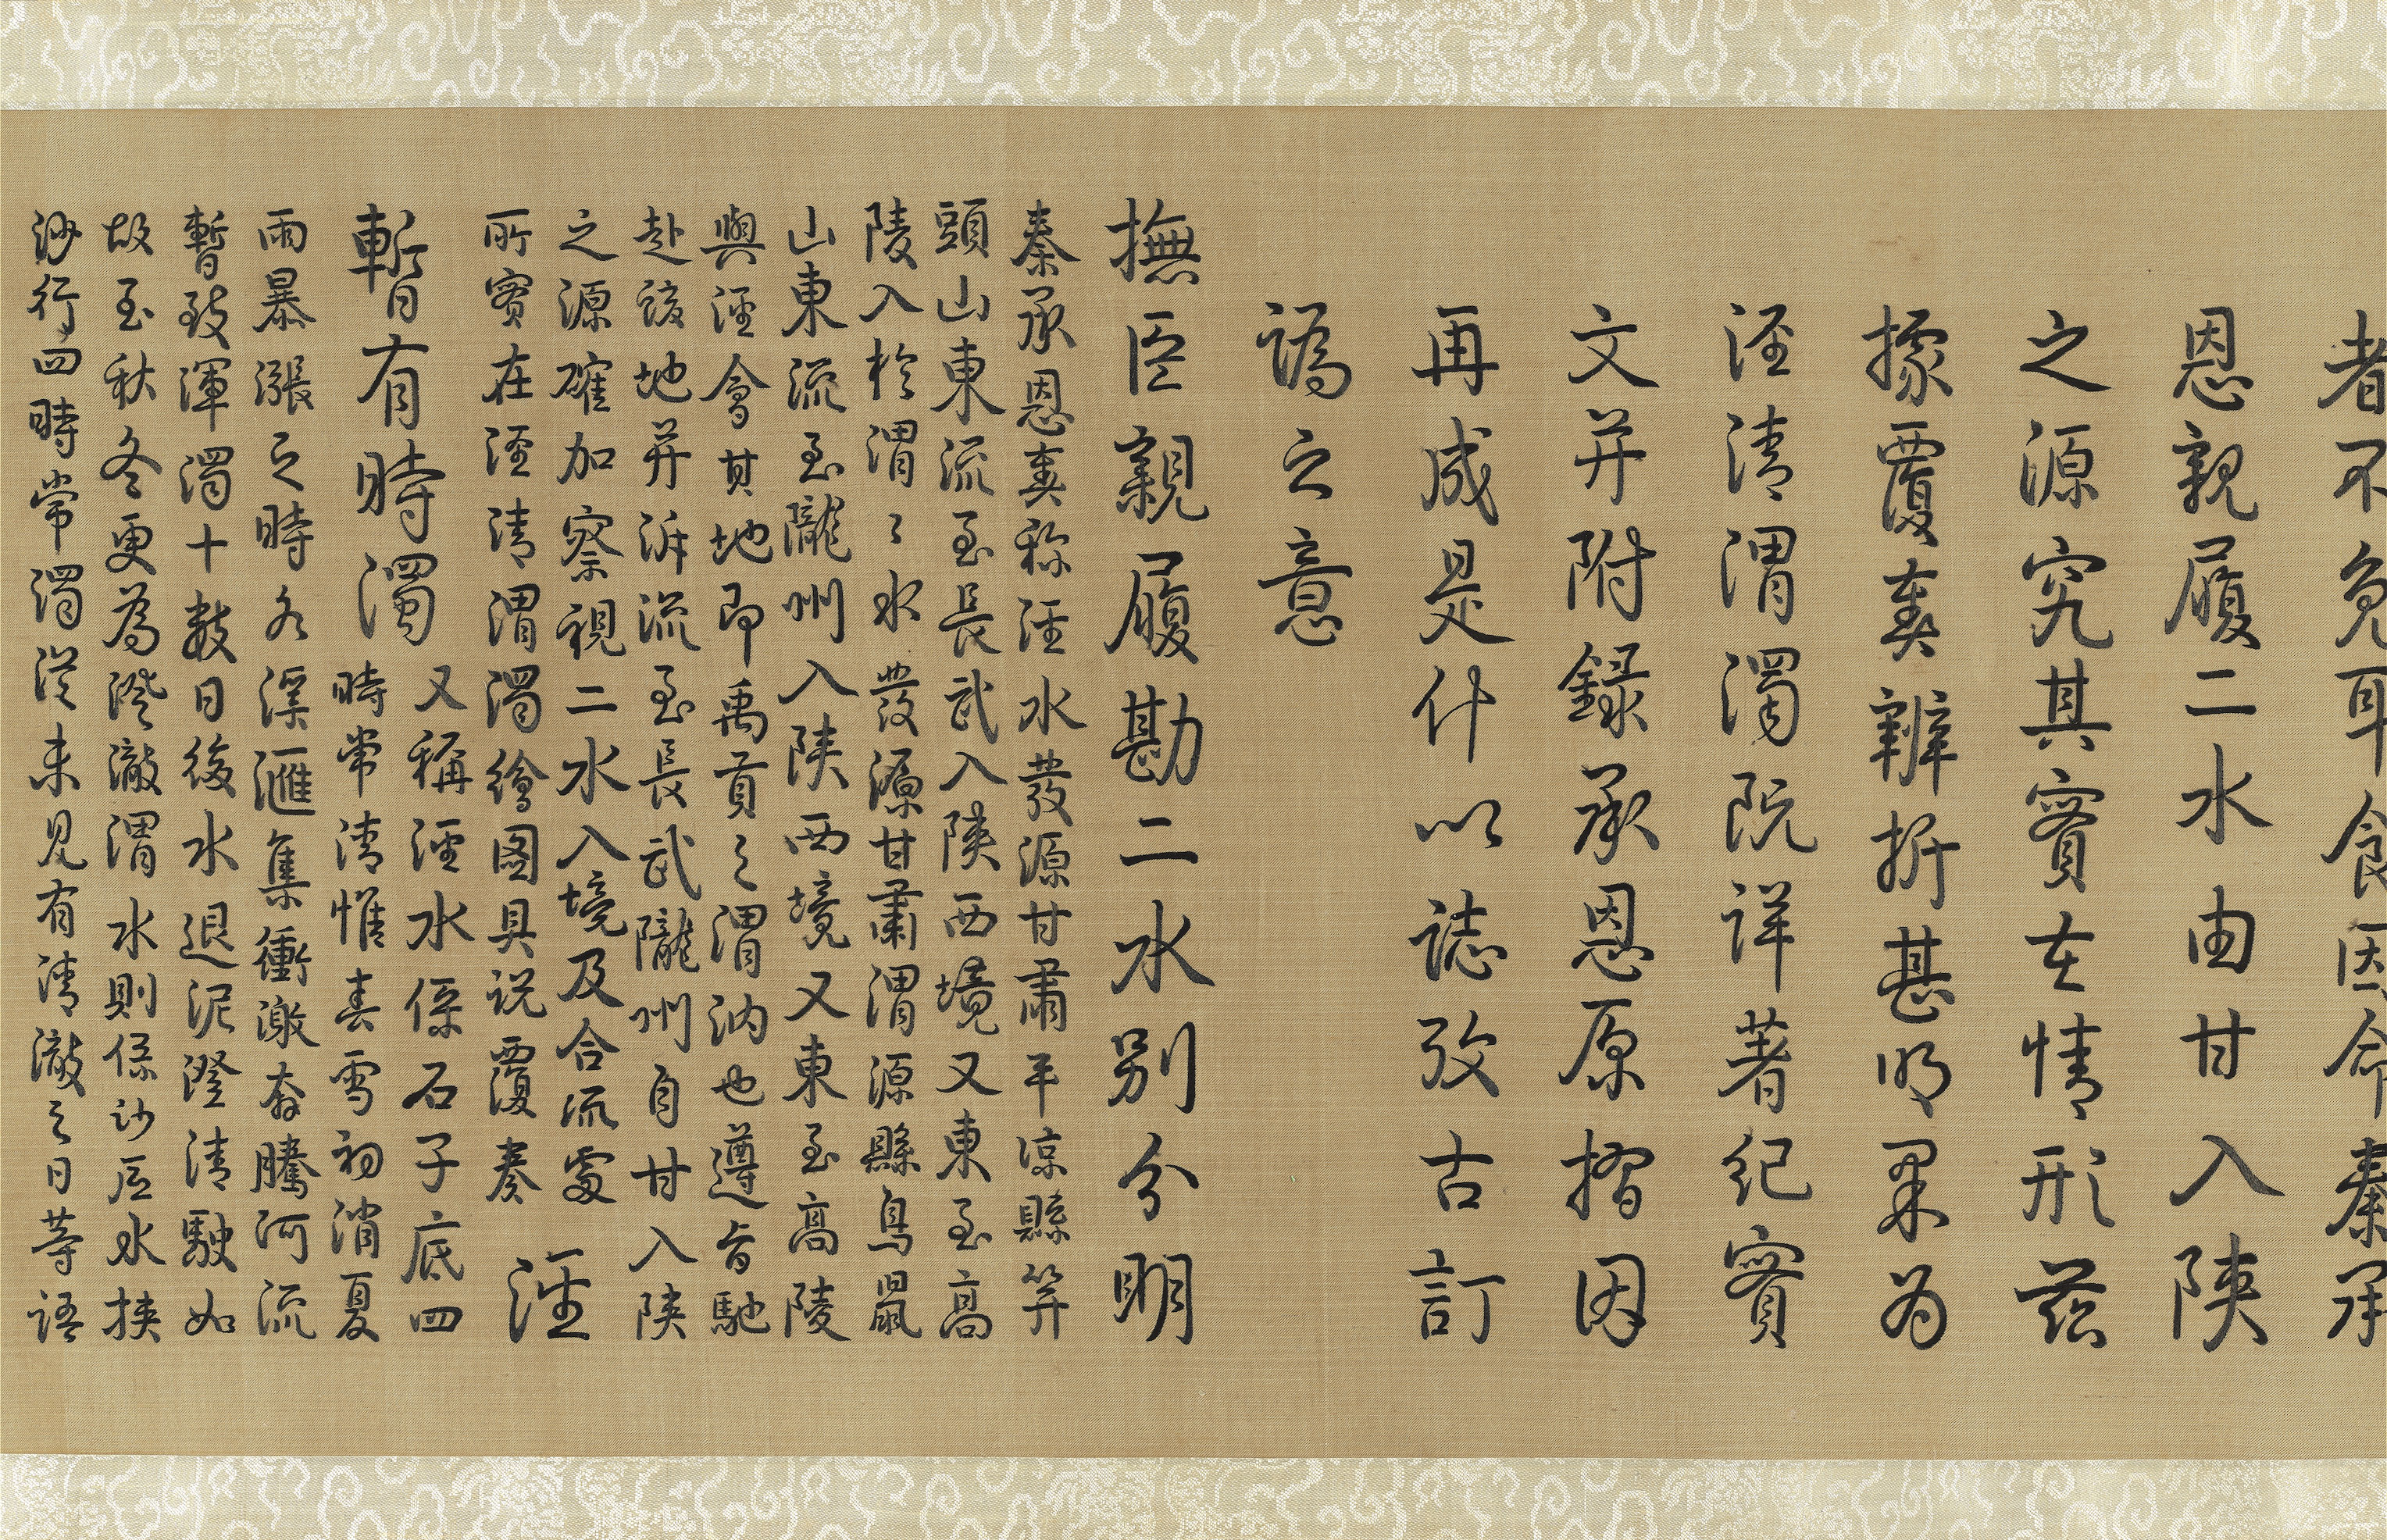 Division of Good and Evil poem by Emperor Qianlong and Complete Documentary and Painting by Dong Gao